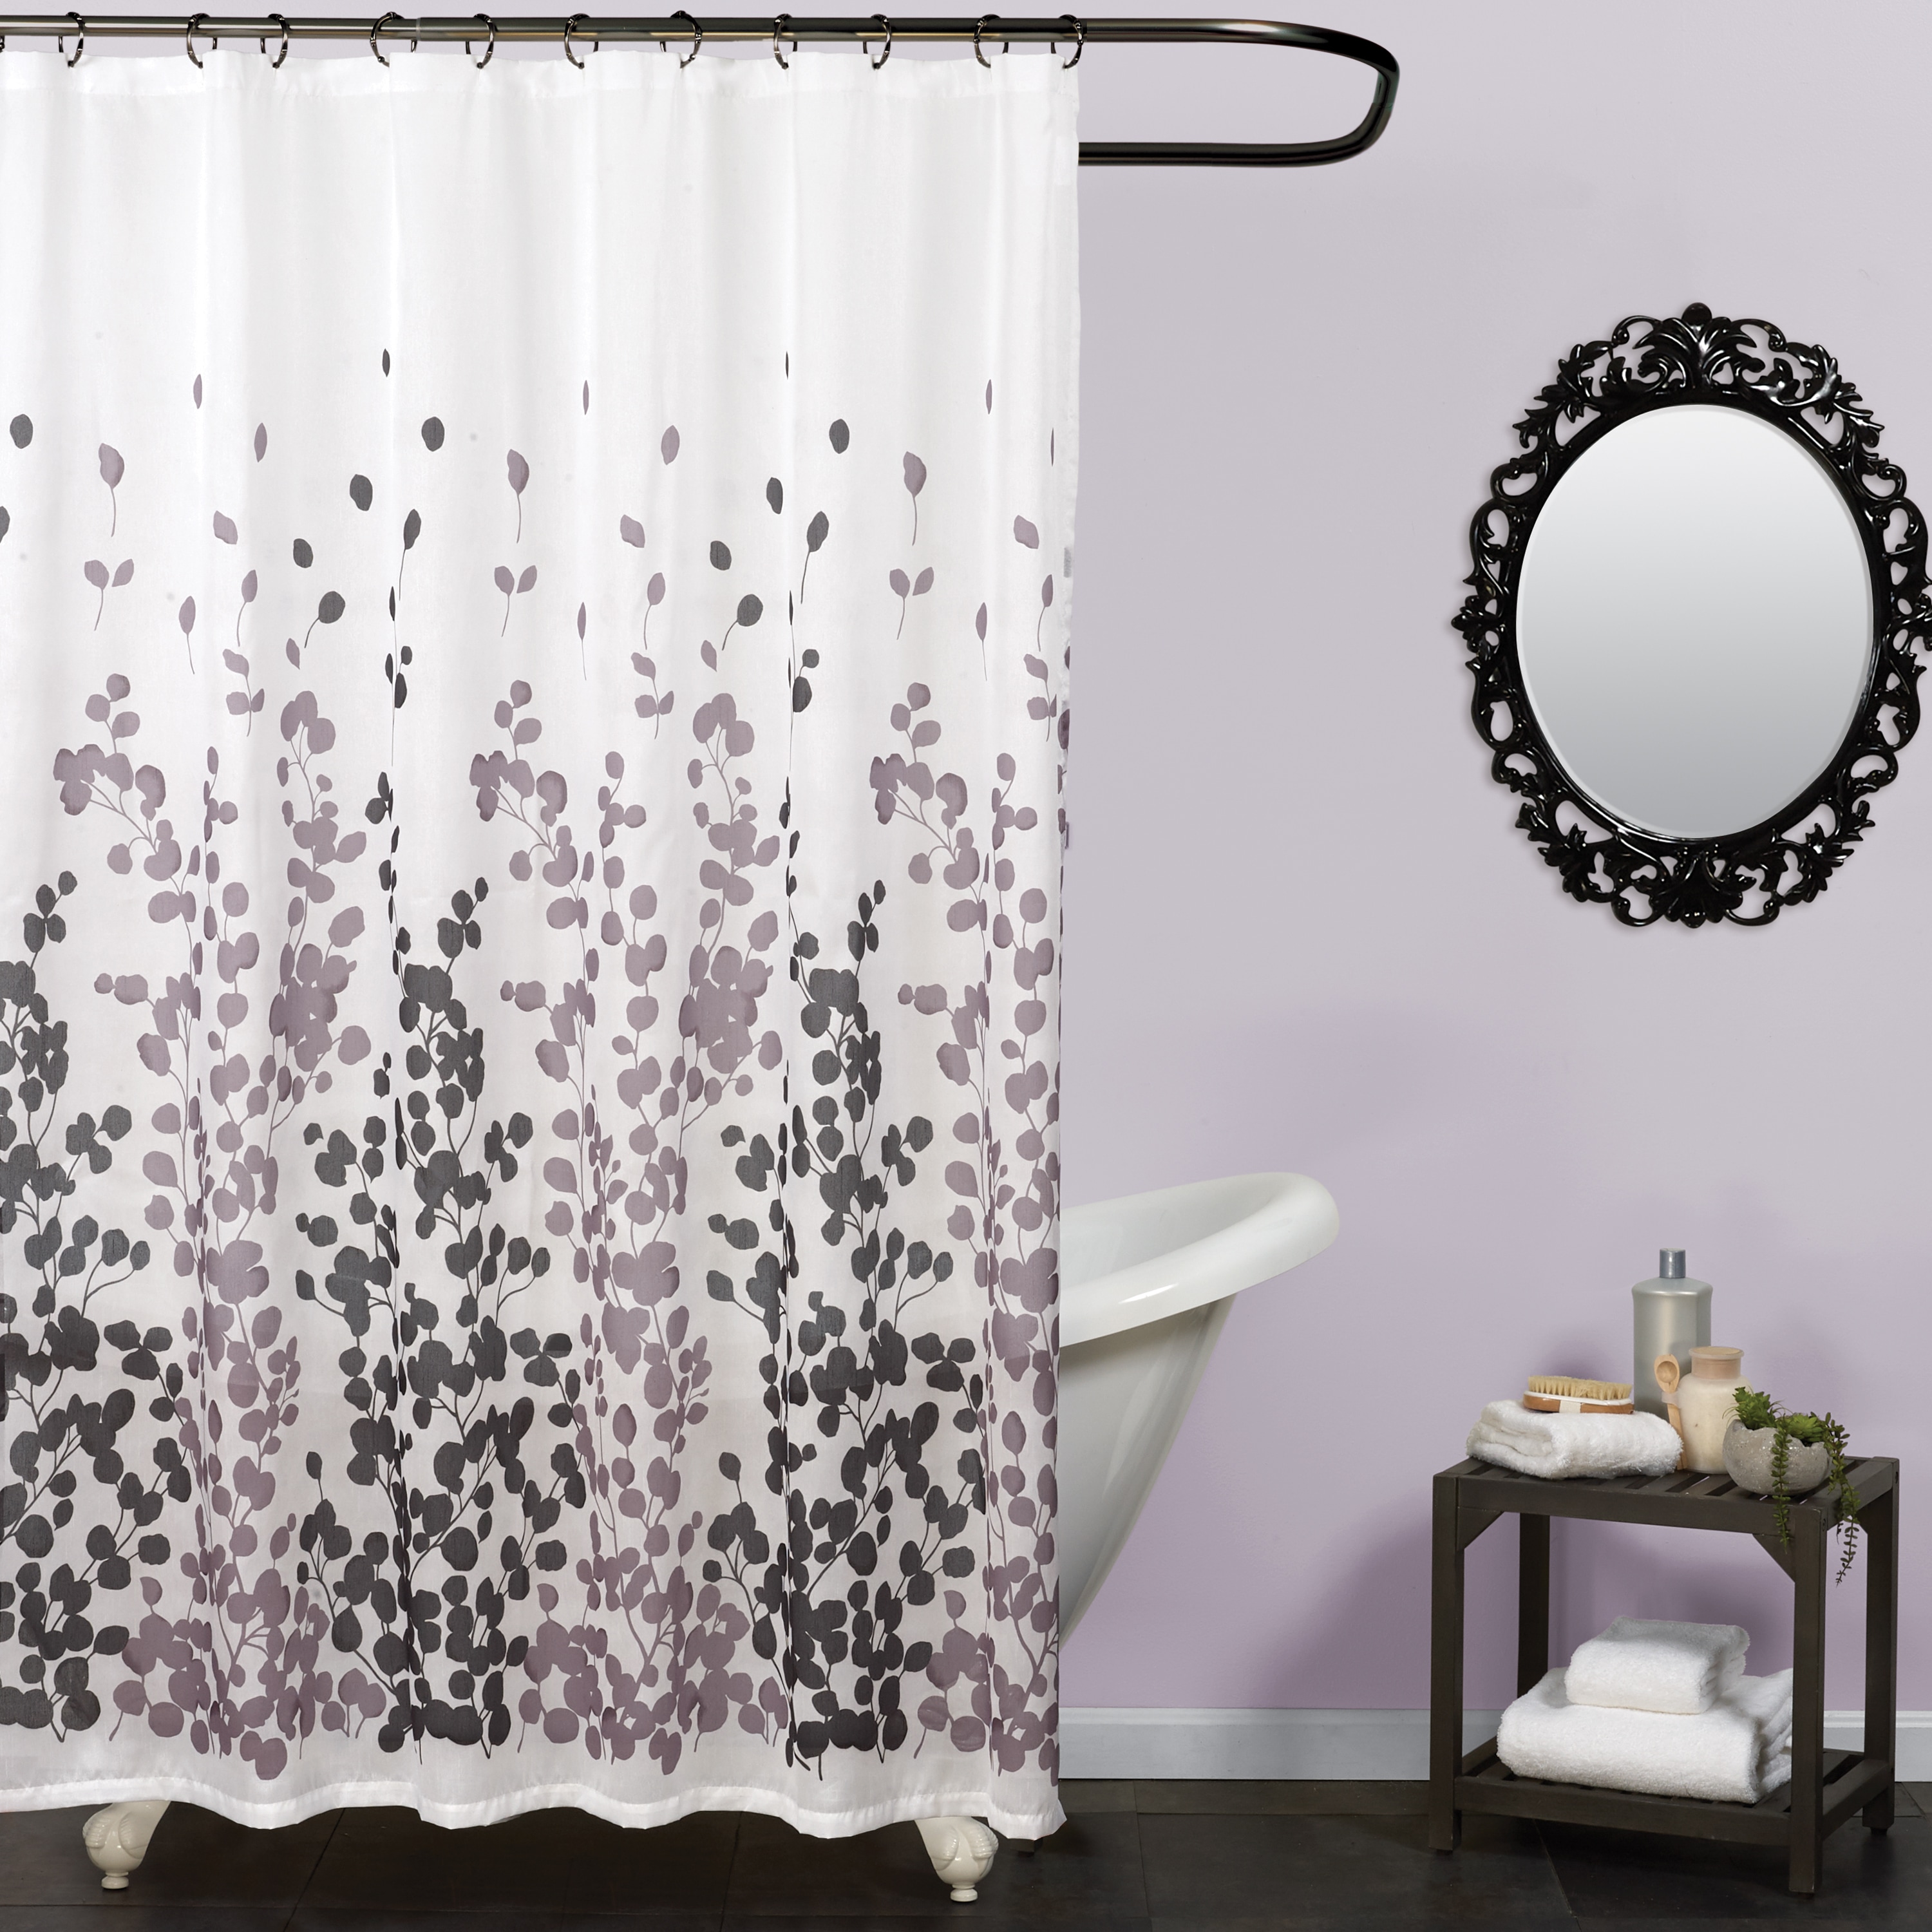 Grey Bathroom Curtains with Geometric Pattern iDesign Shower Curtain for Bathtub or Shower Reliable Splash Protection Bathroom Accessory Made of Water-Repellent Polyester 